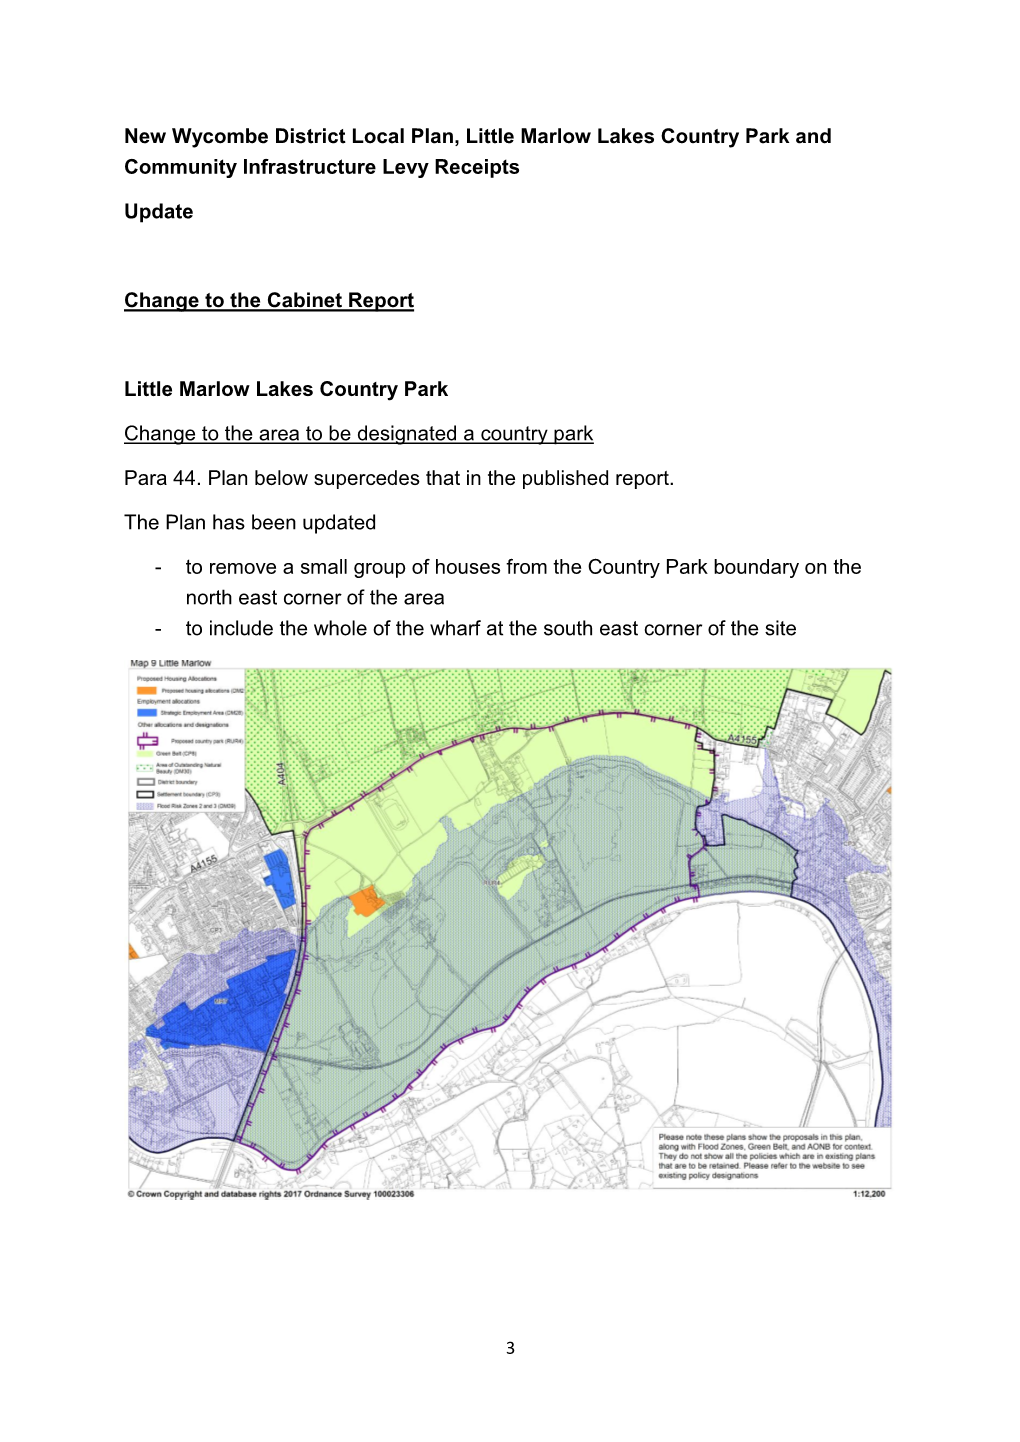 New Wycombe District Local Plan, Little Marlow Lakes Country Park and Community Infrastructure Levy Receipts Update Change to Th